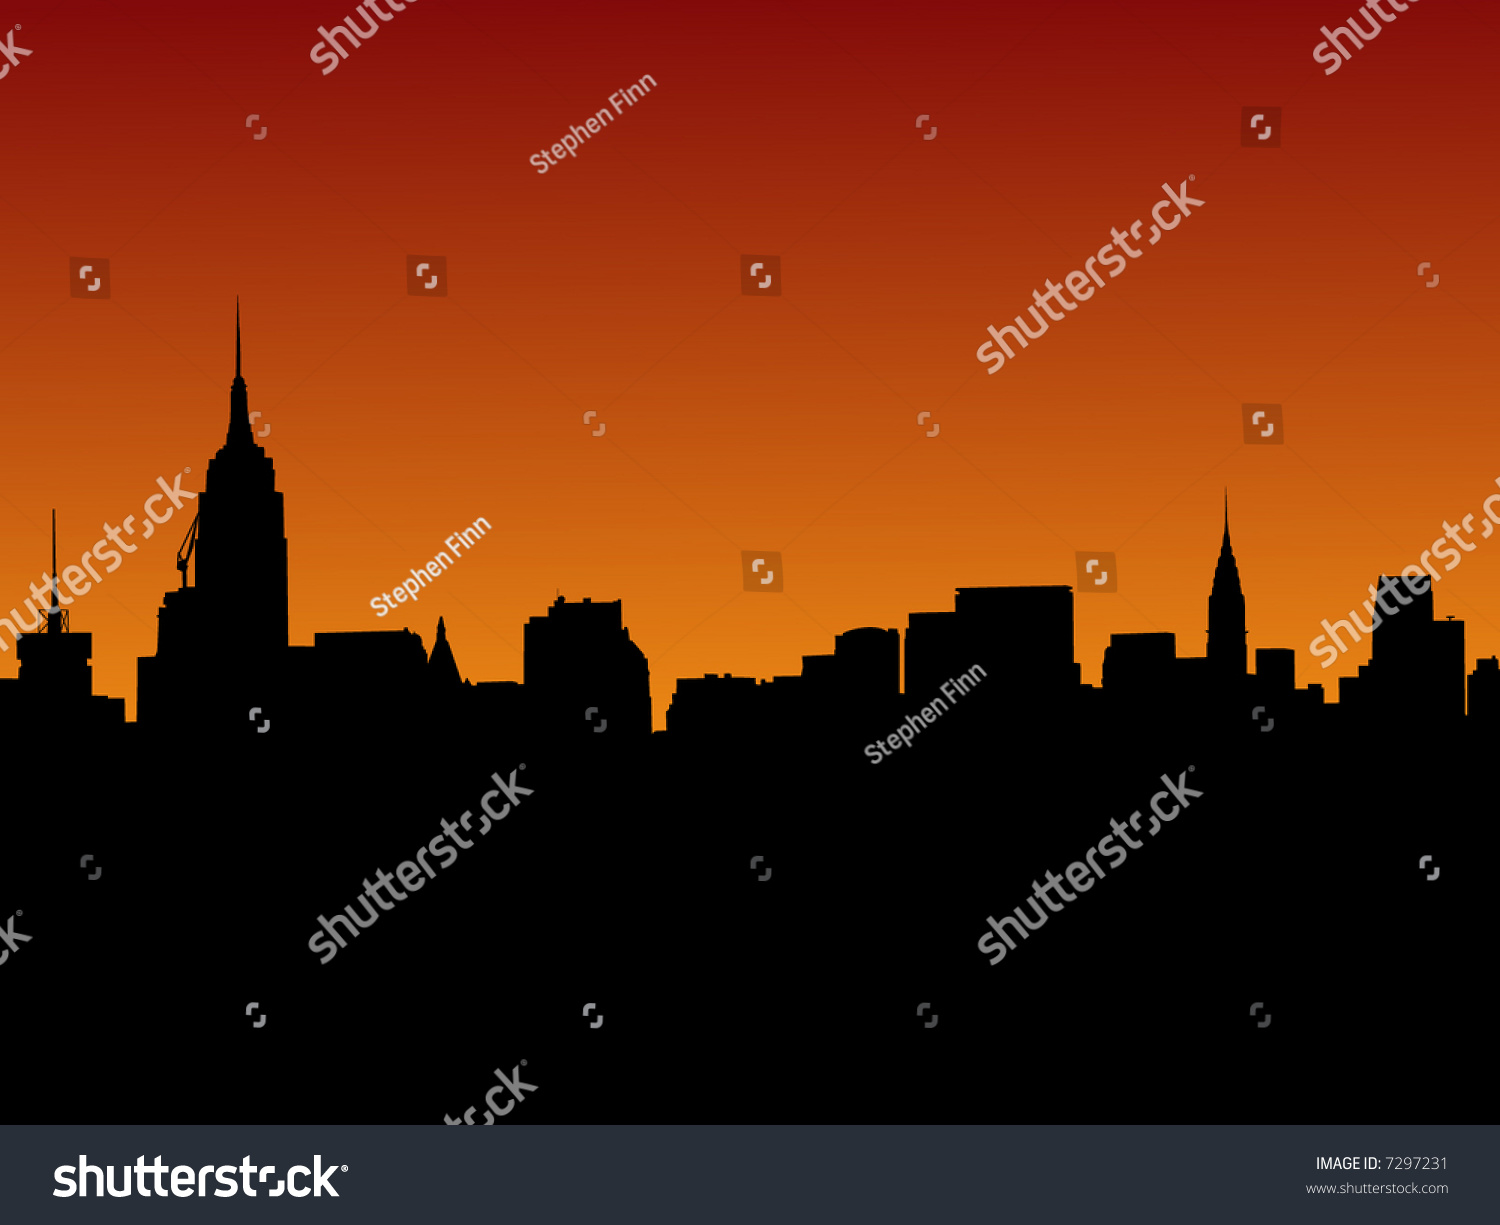 SVG of Midtown Manhattan skyline at sunset illustration with over 30 separate buildings in eps format svg